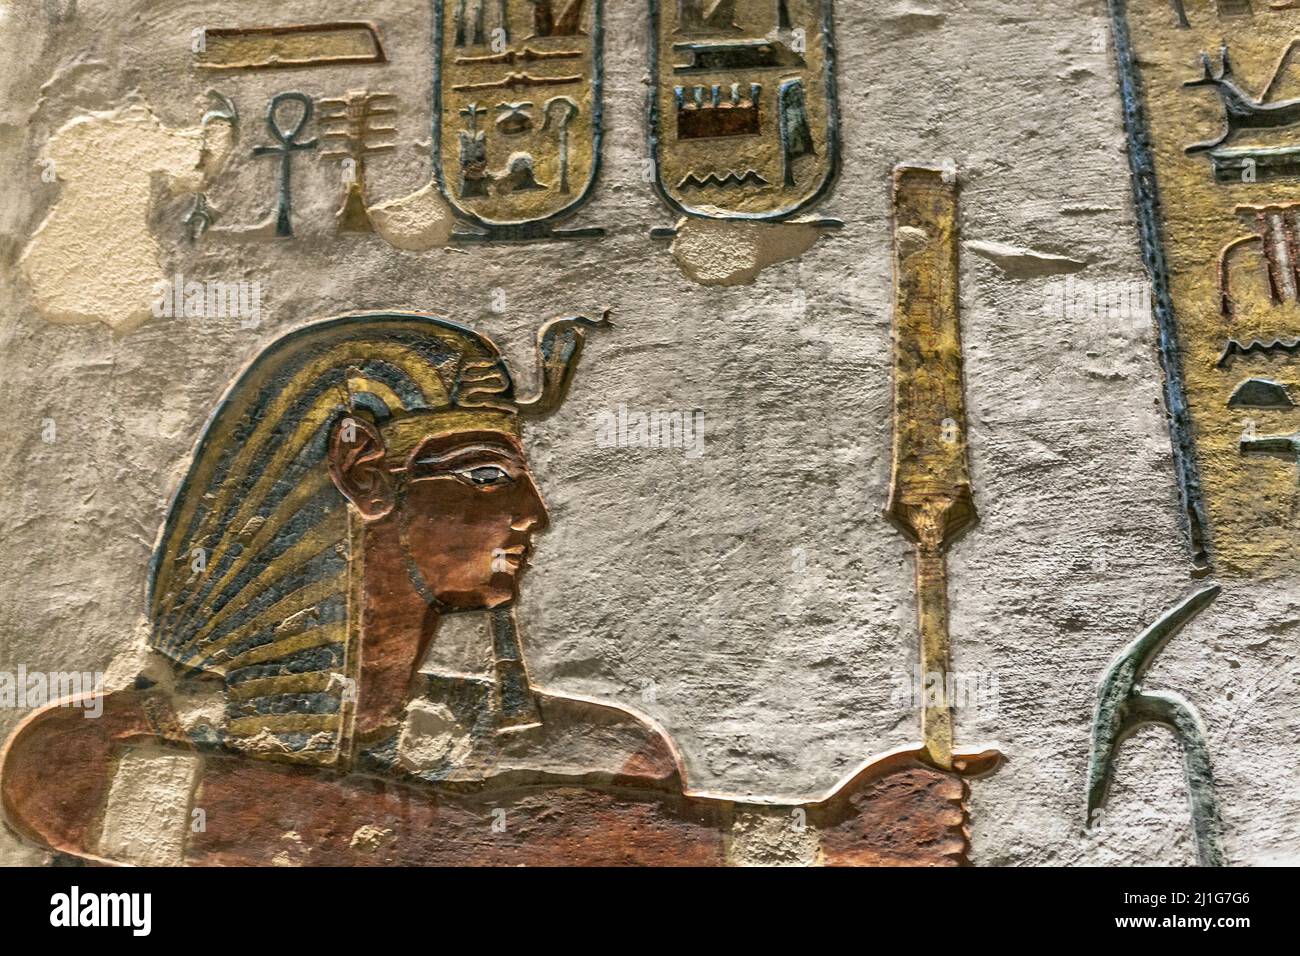 Profile of Ramesses III making offerings to Osiris and Anubis in the tomb of Ramesses III, KV11, the Valley of the Kings Stock Photo